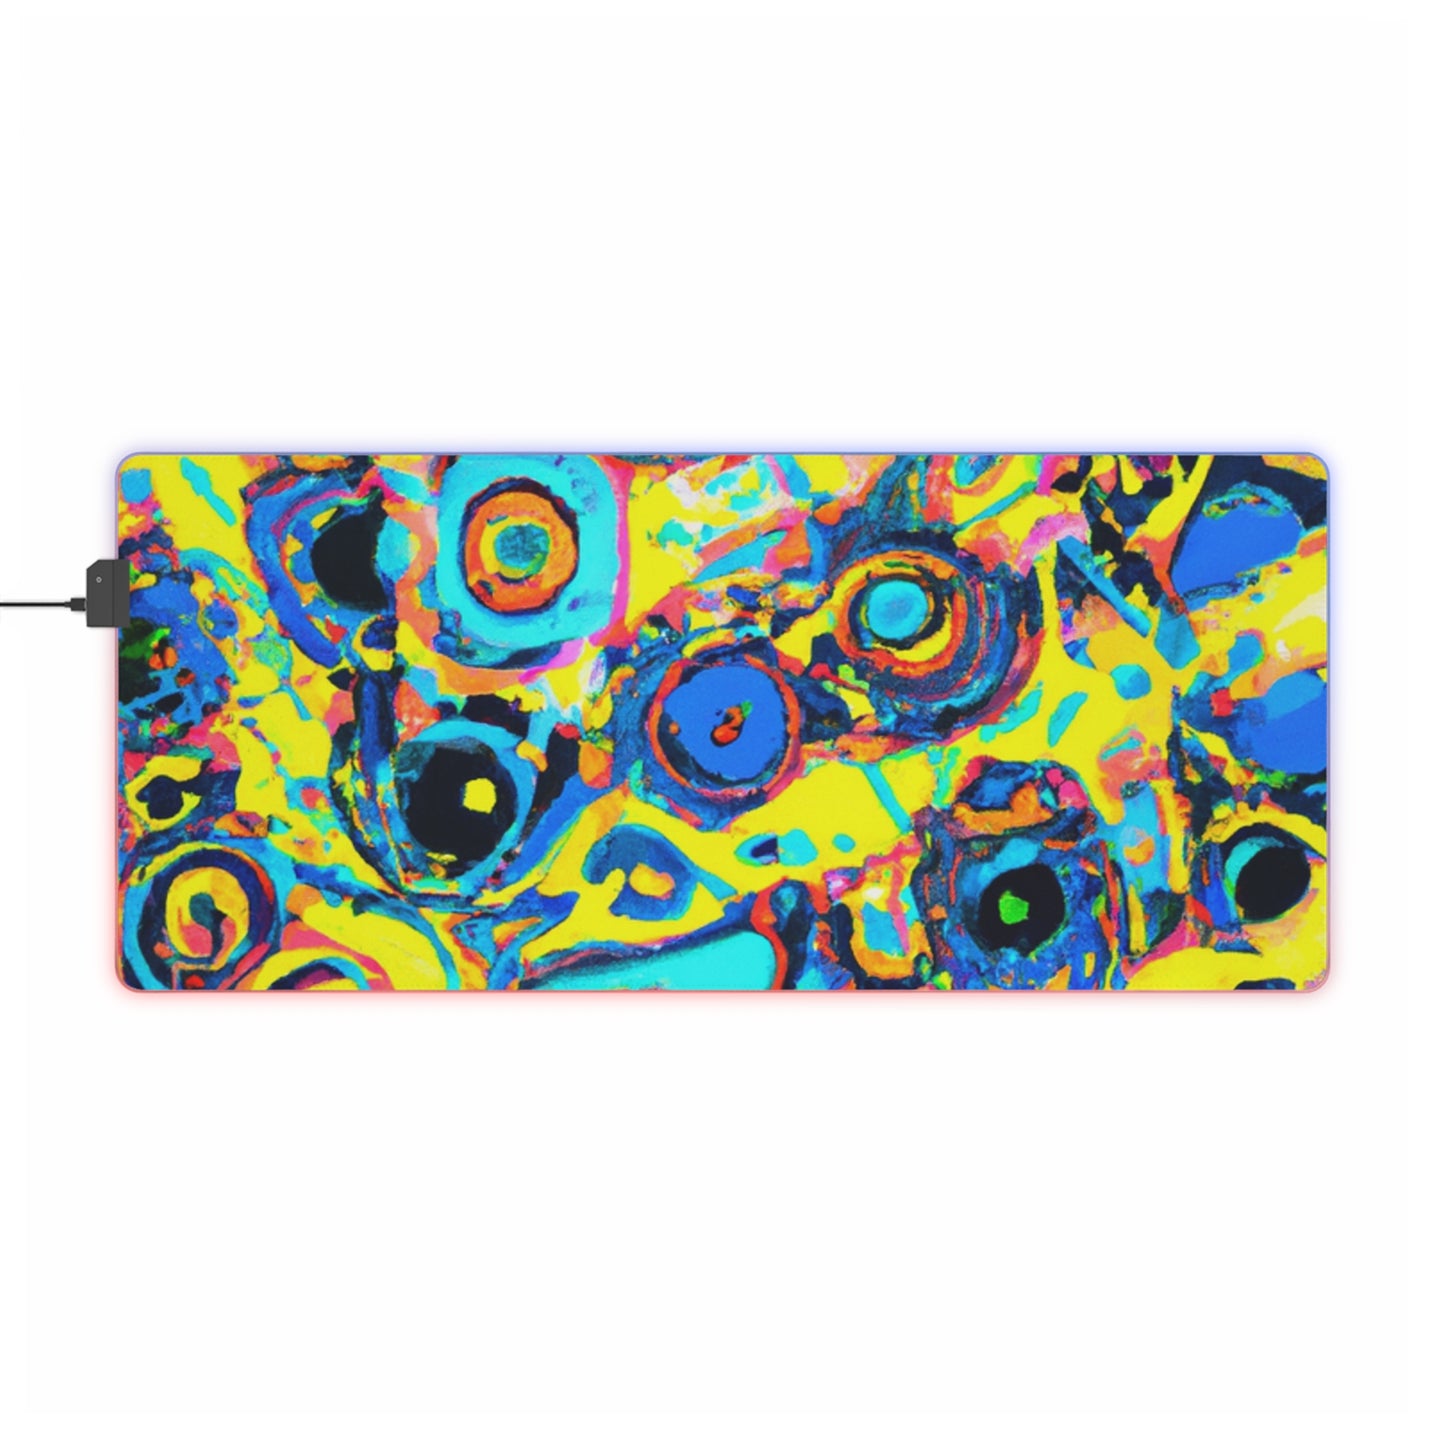 Sally Sailor - Psychedelic Trippy LED Light Up Gaming Mouse Pad